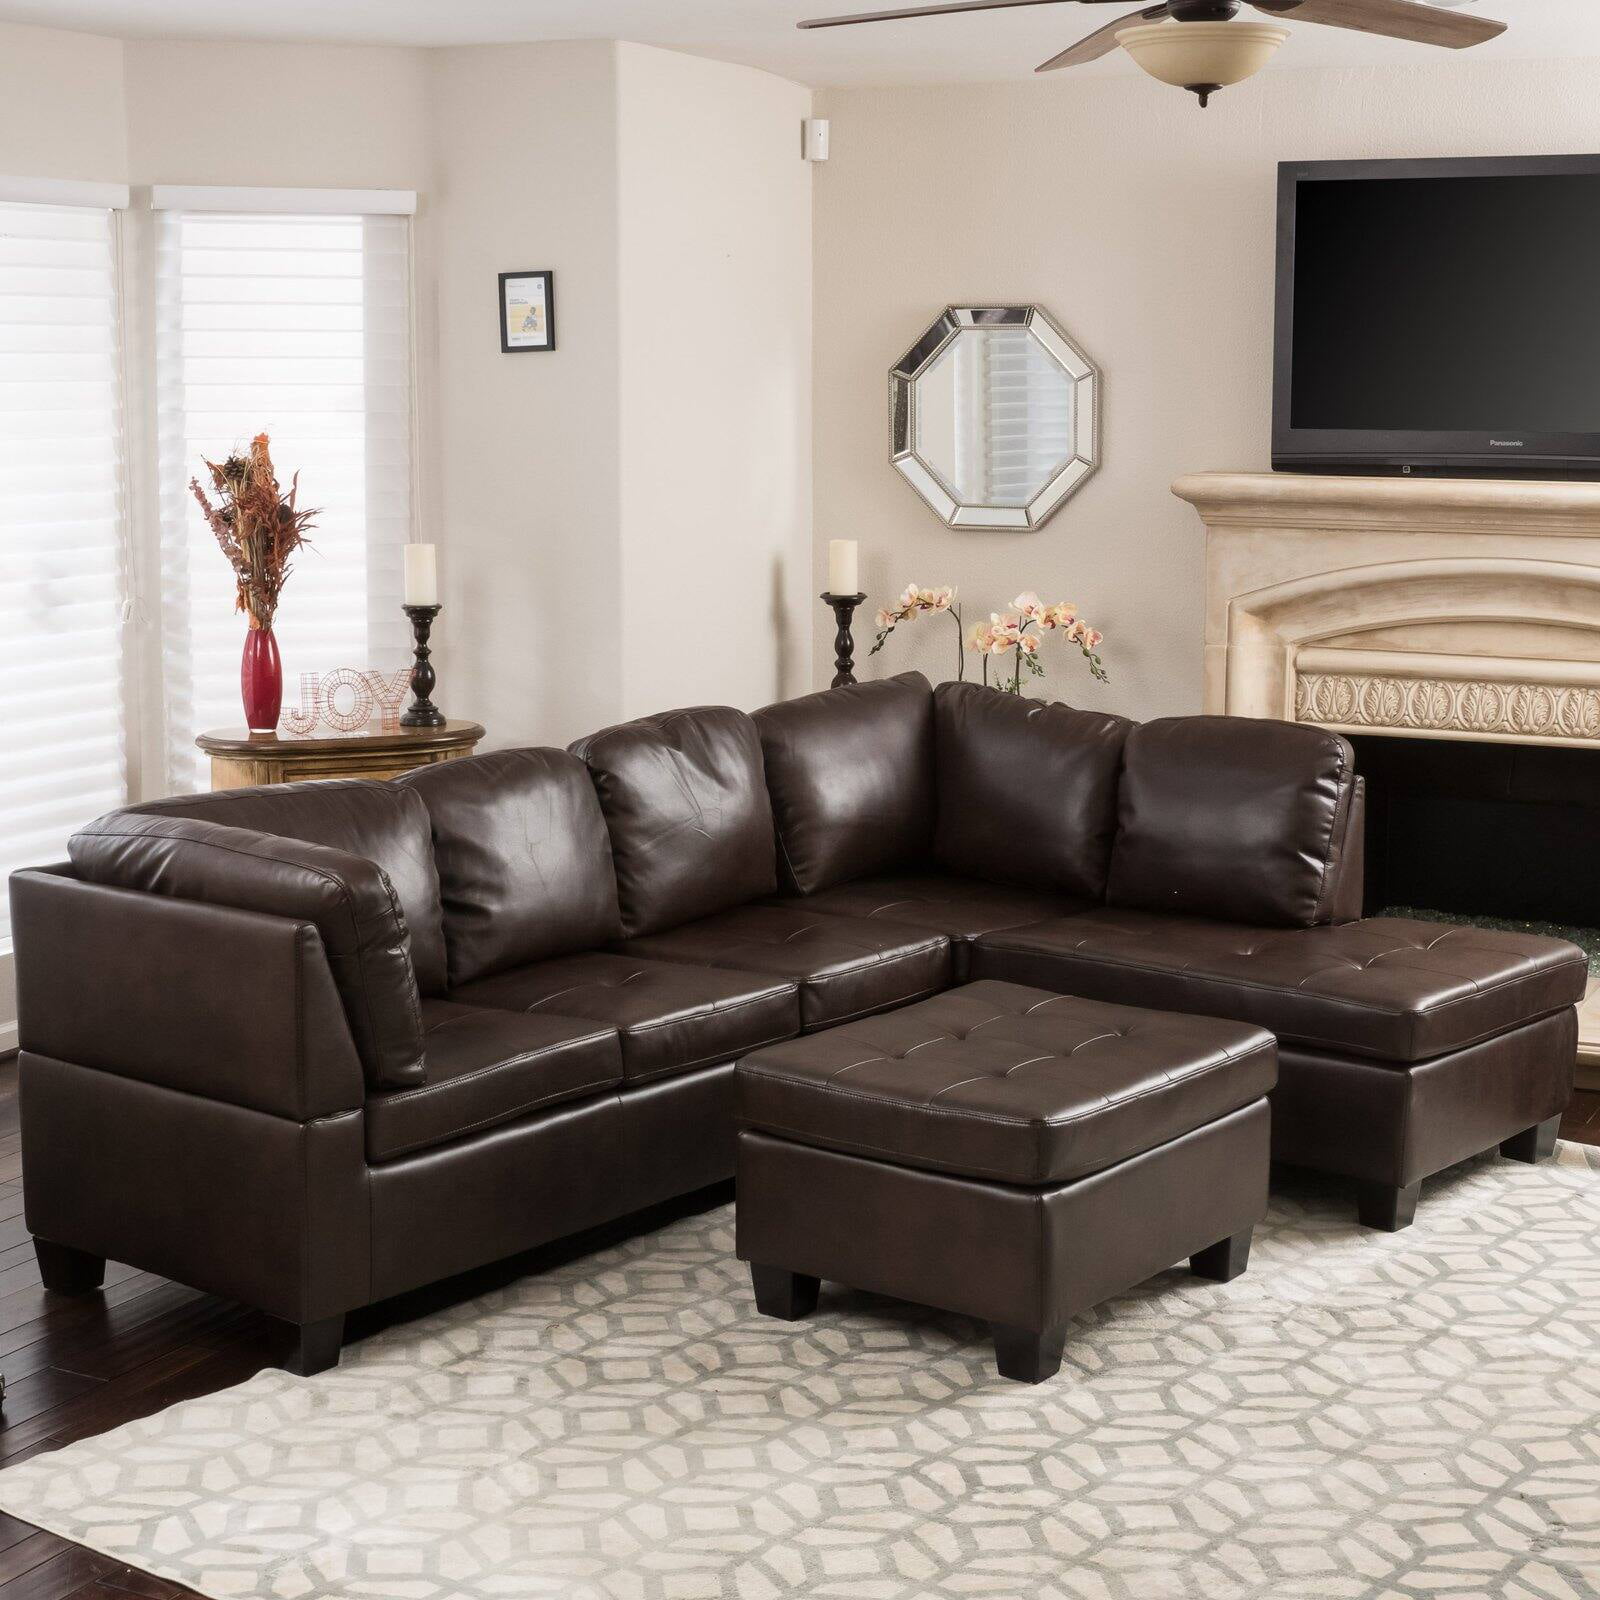 Evan 3 Piece Leather Sectional Sofa, 3 Piece Leather Sectional